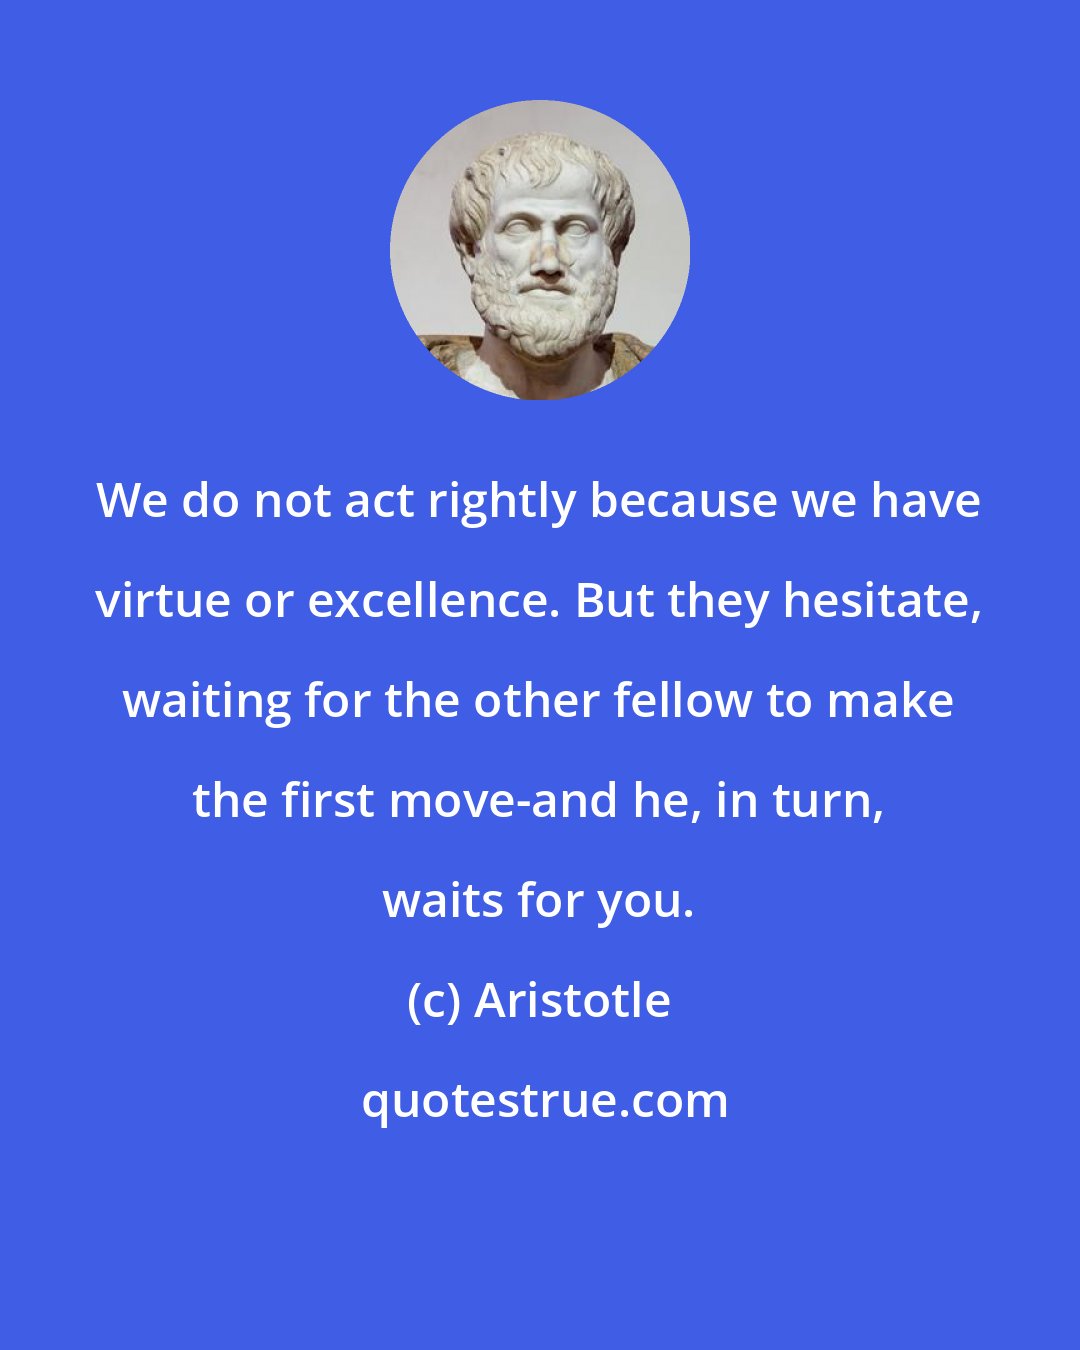 Aristotle: We do not act rightly because we have virtue or excellence. But they hesitate, waiting for the other fellow to make the first move-and he, in turn, waits for you.